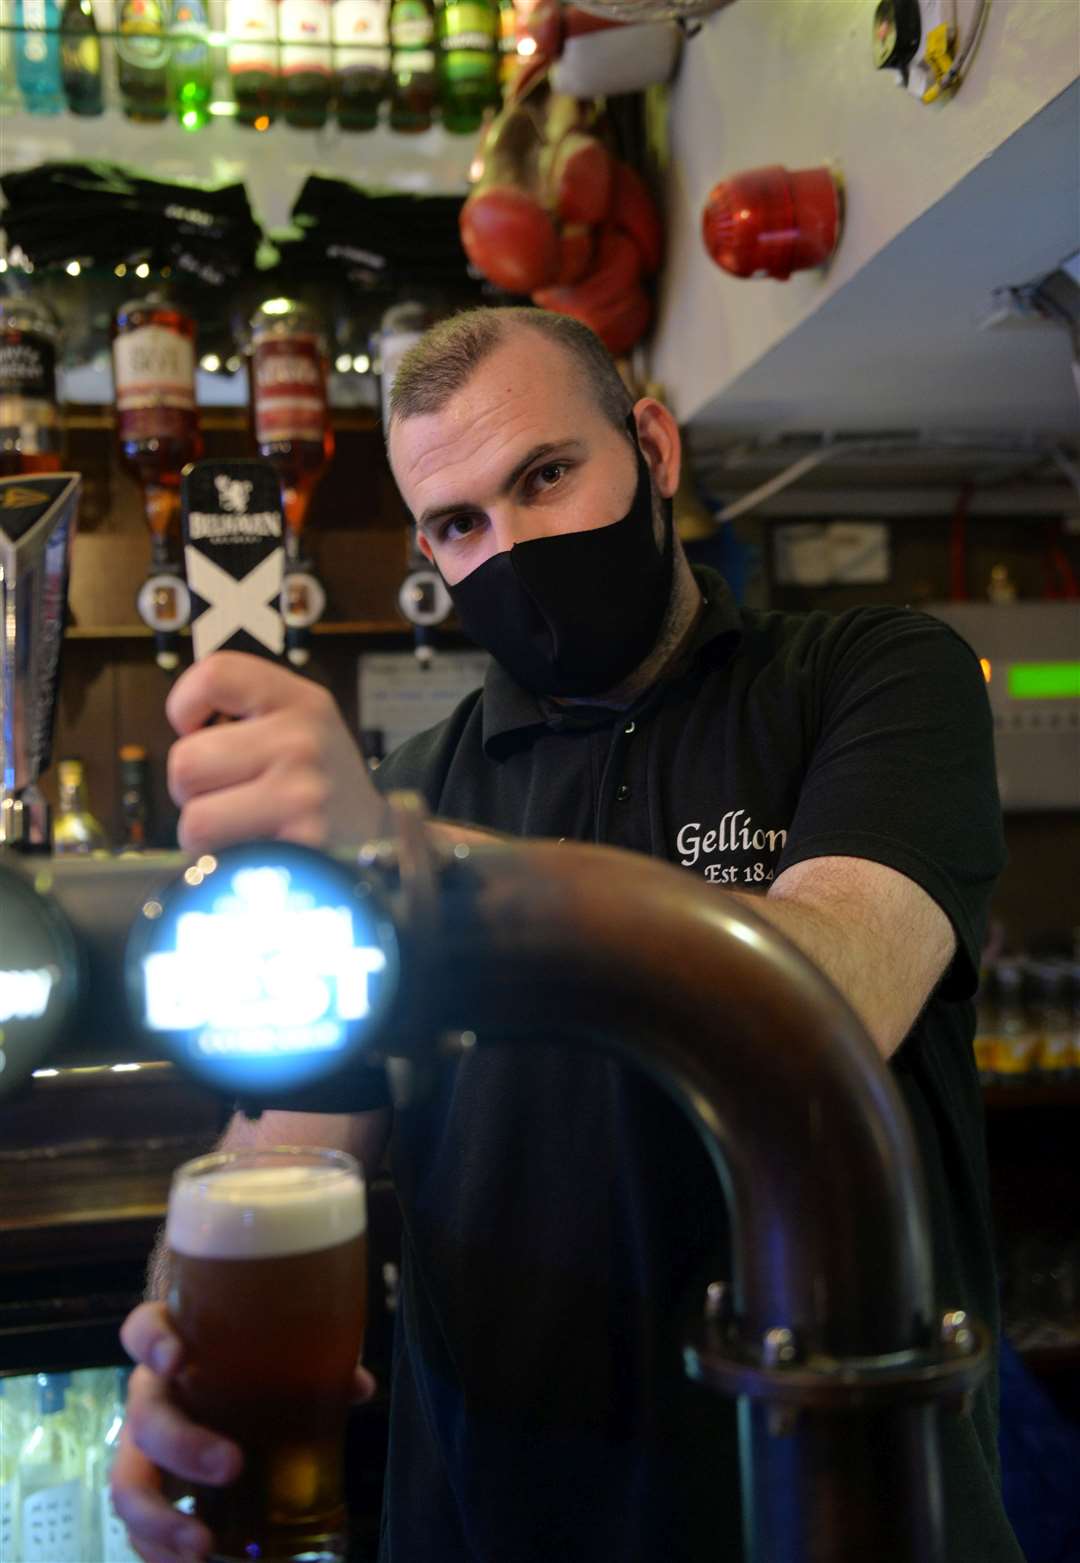 Closing Scotland's pubs for 16 days will do little to halt Covid transmission, a city landlord has warned.